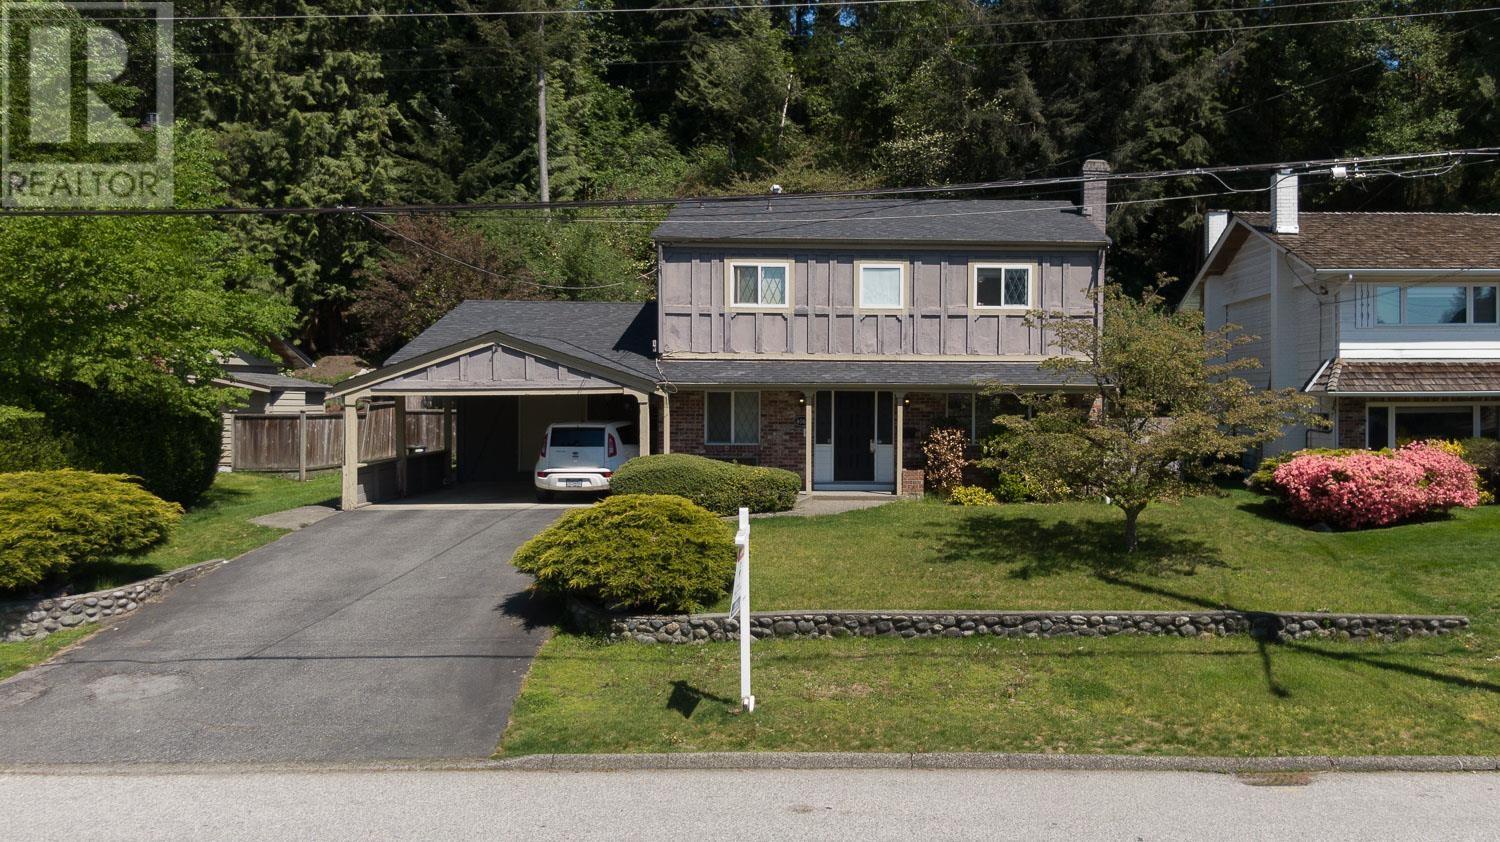 4062 RUBY AVENUE located in North Vancouver, British Columbia